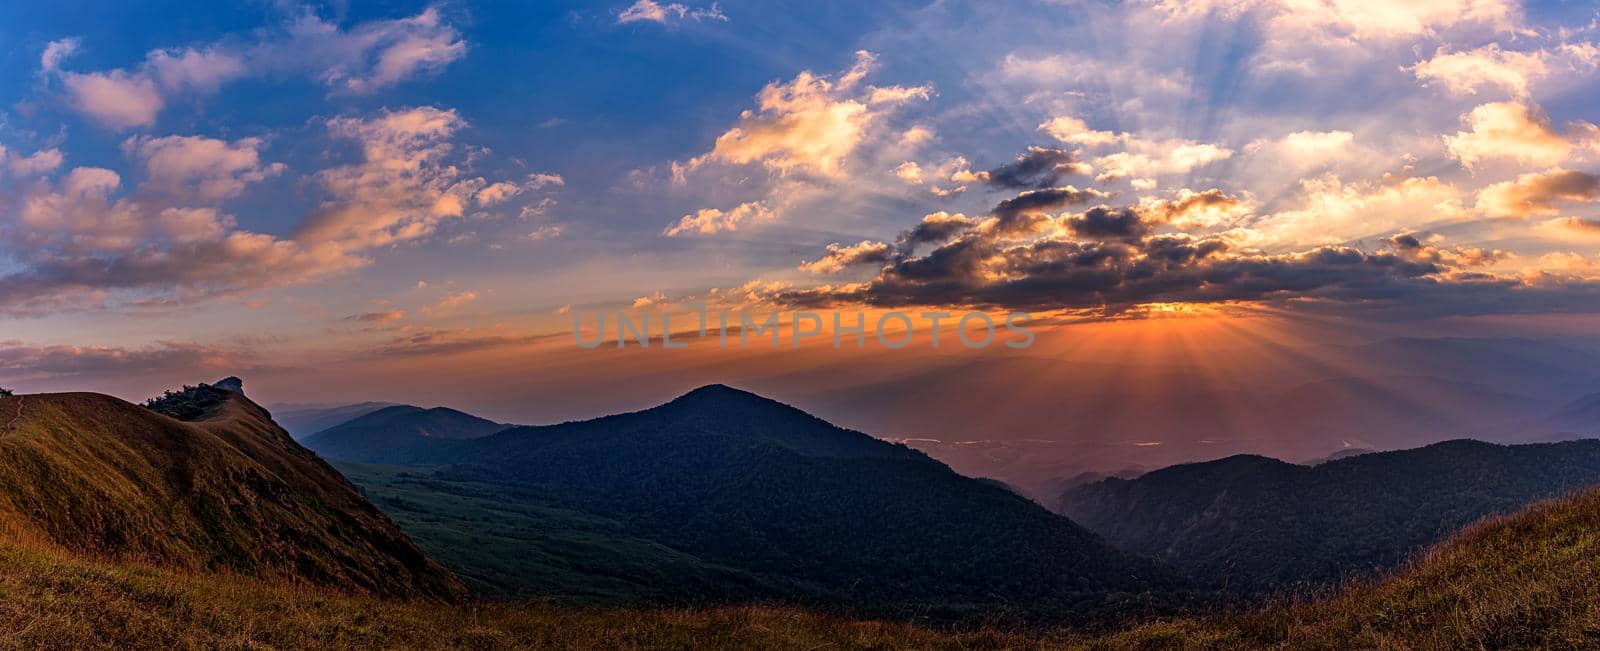 Beautiful sunset in the evening on Mon Chong mount, Chiang Mai, Thailand. Is a popular place trekking mountain